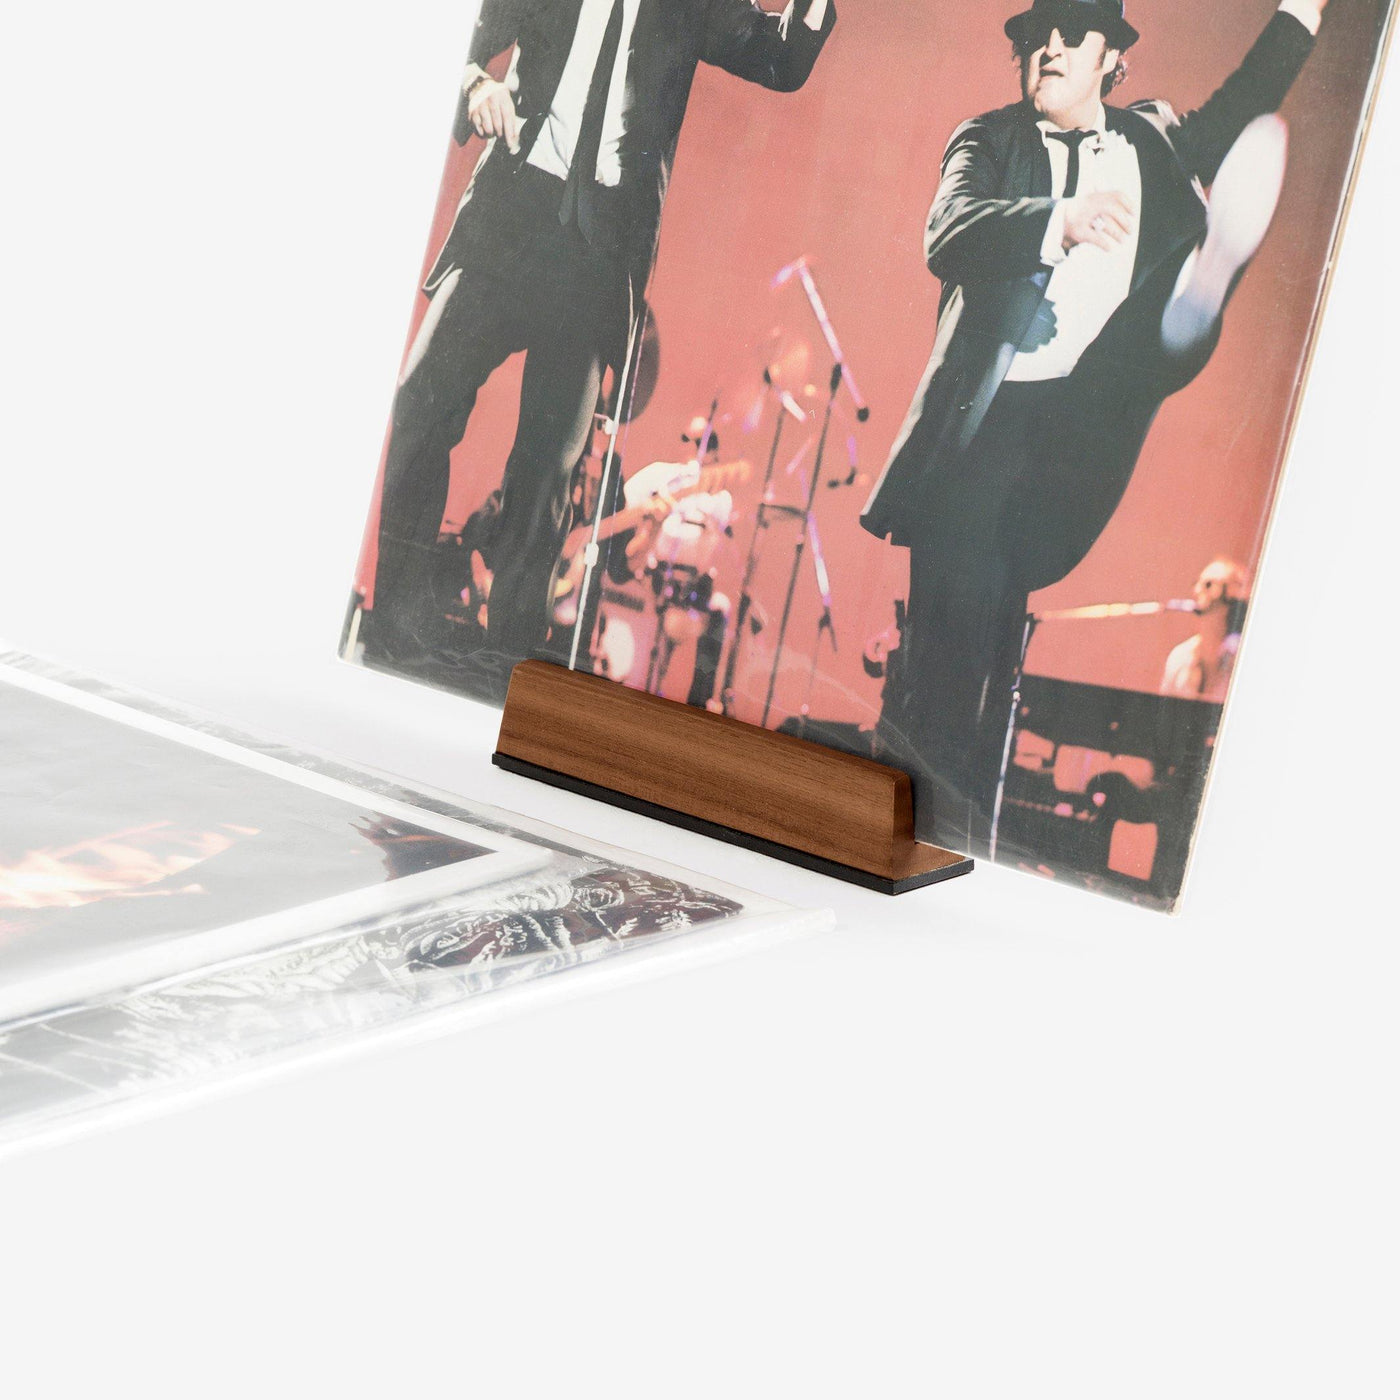 Visible Vinyl – Tabletop Record Display - Well Made